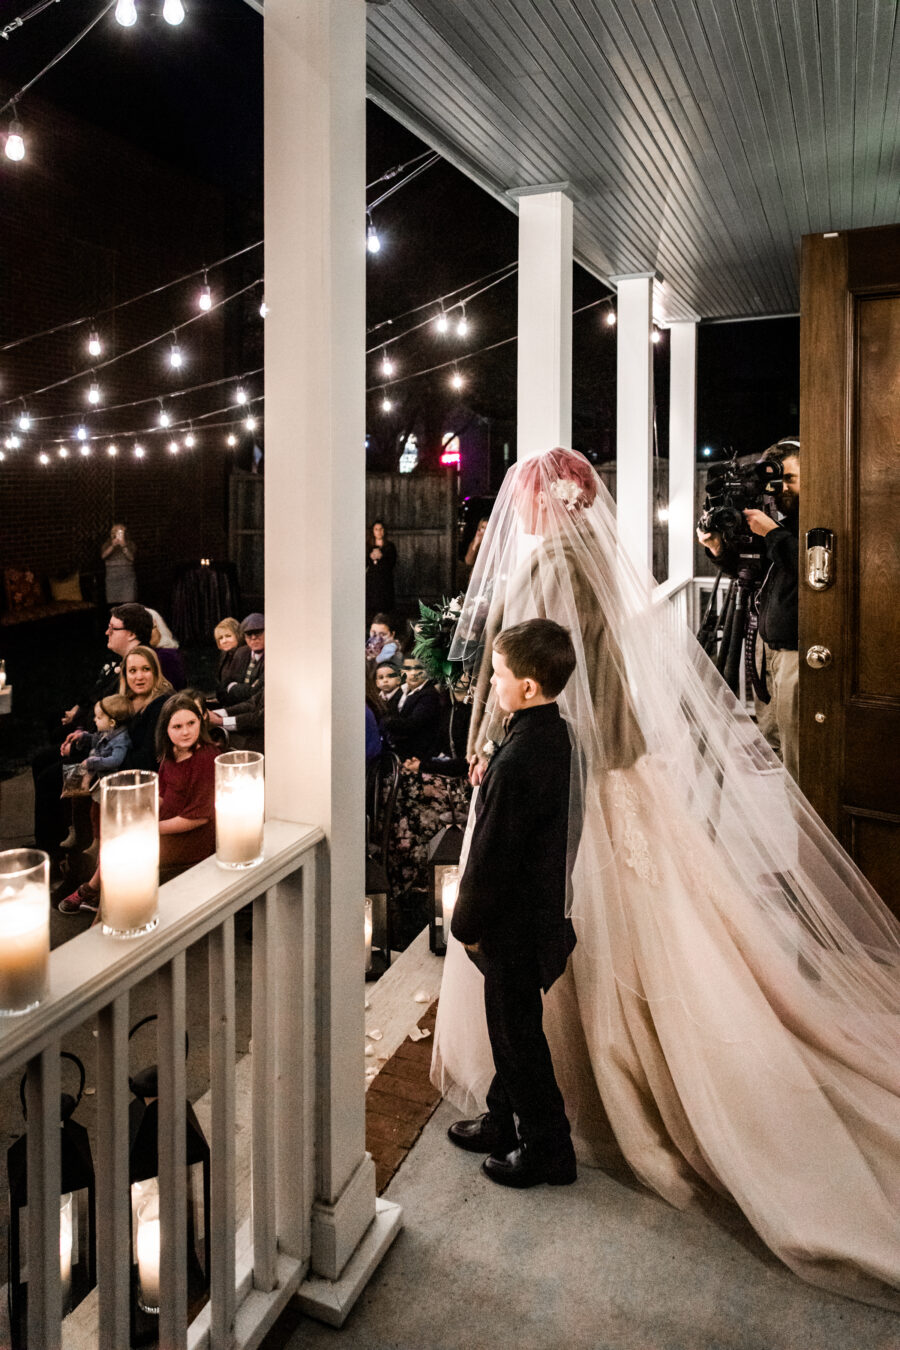 Nashville Wish Upon a Wedding captured by Nyk + Cali Photography featured on Nashville Bride Guide